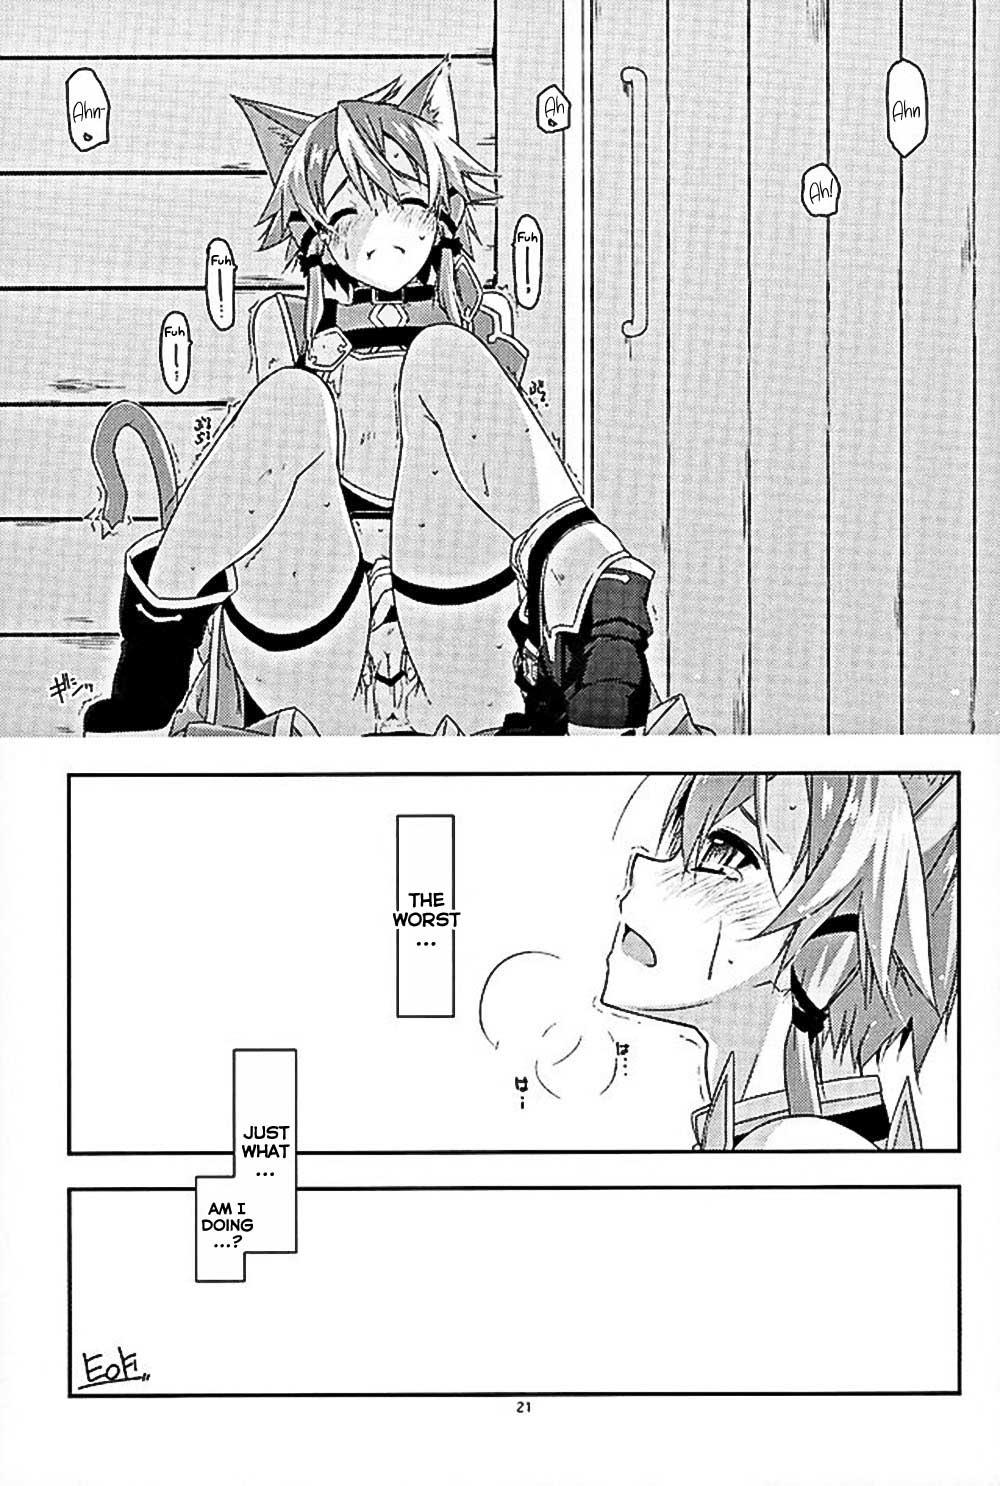 With Envy - Sword art online Yoga - Page 18